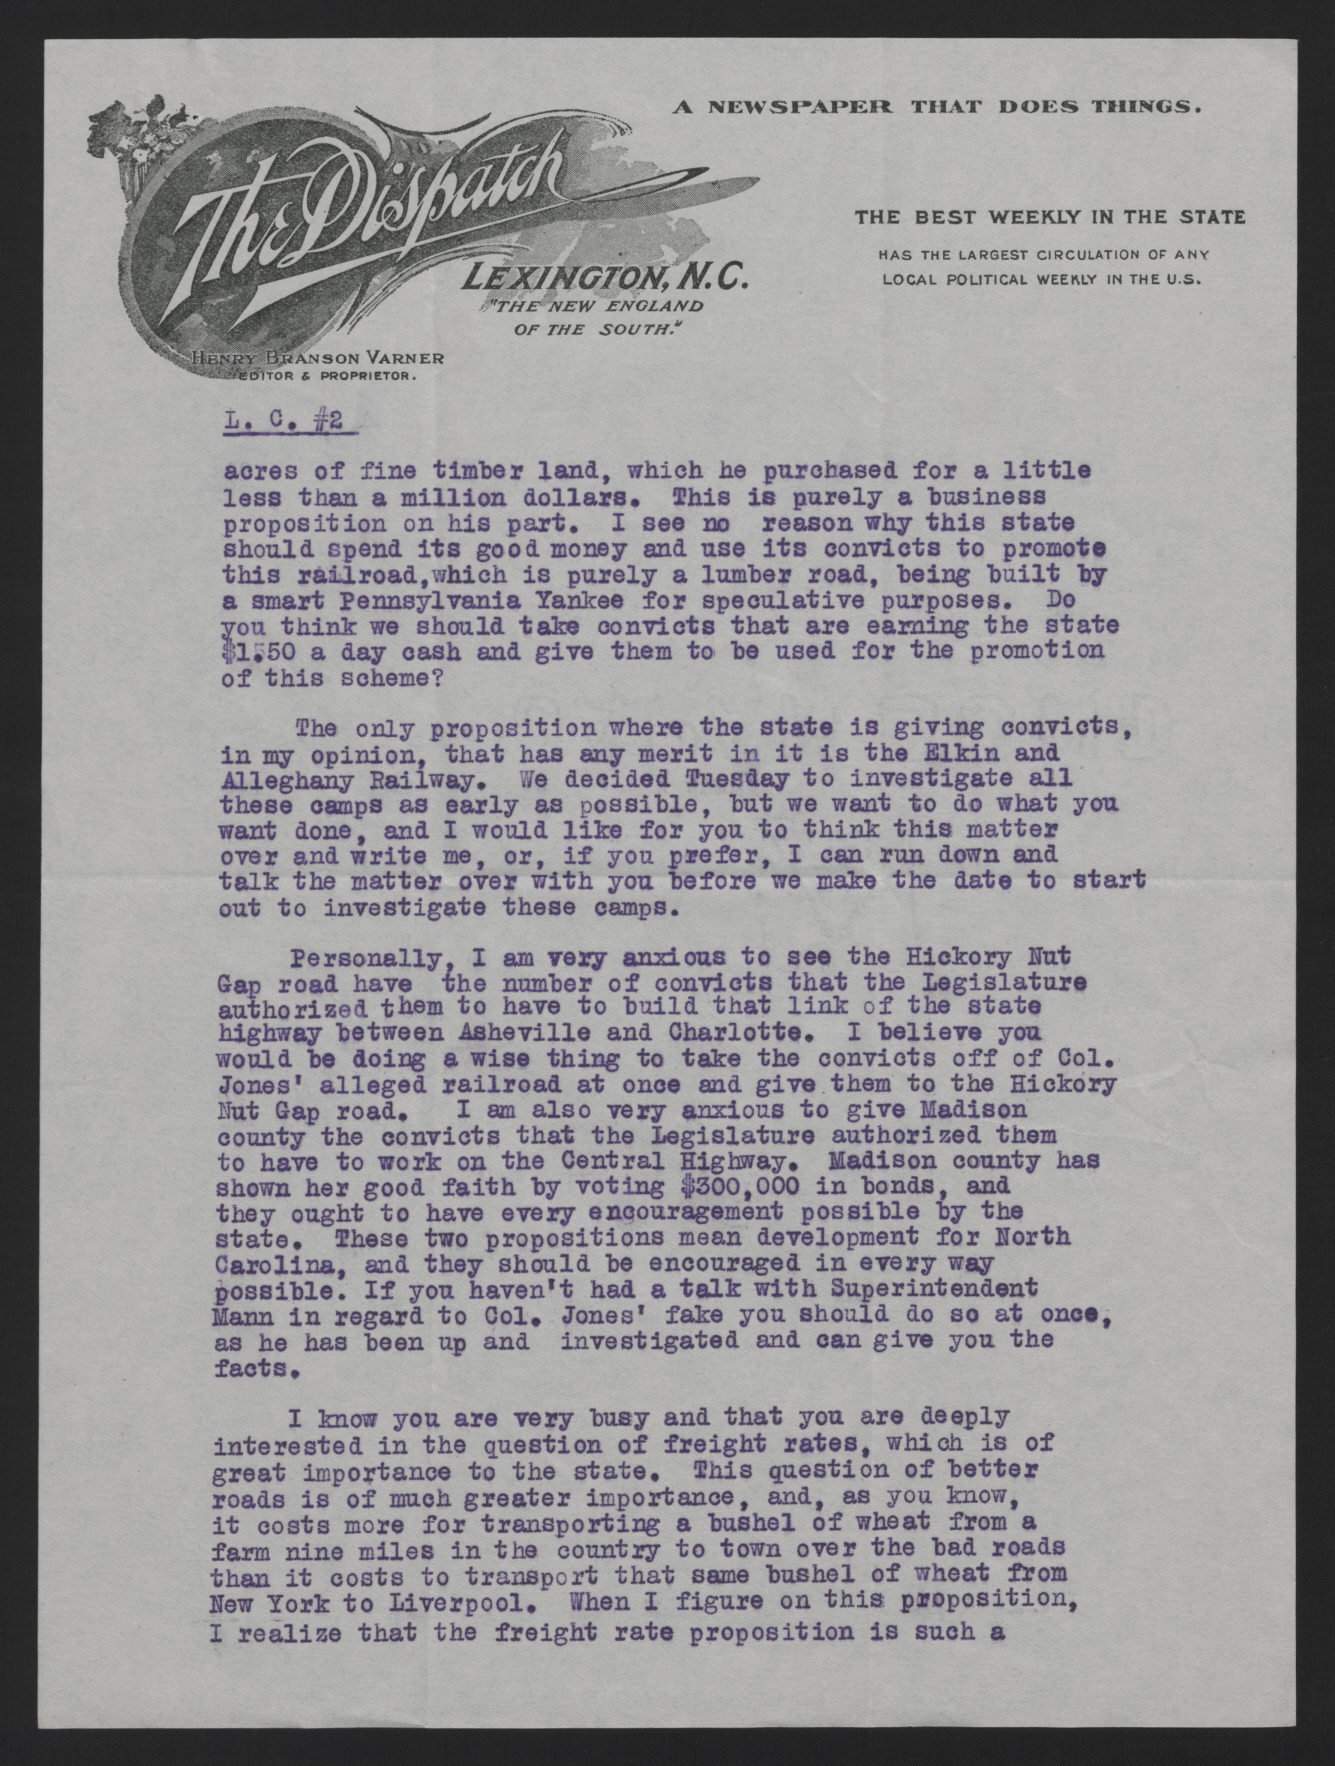 Letter from Varner to Craig, May 15, 1913, page 2